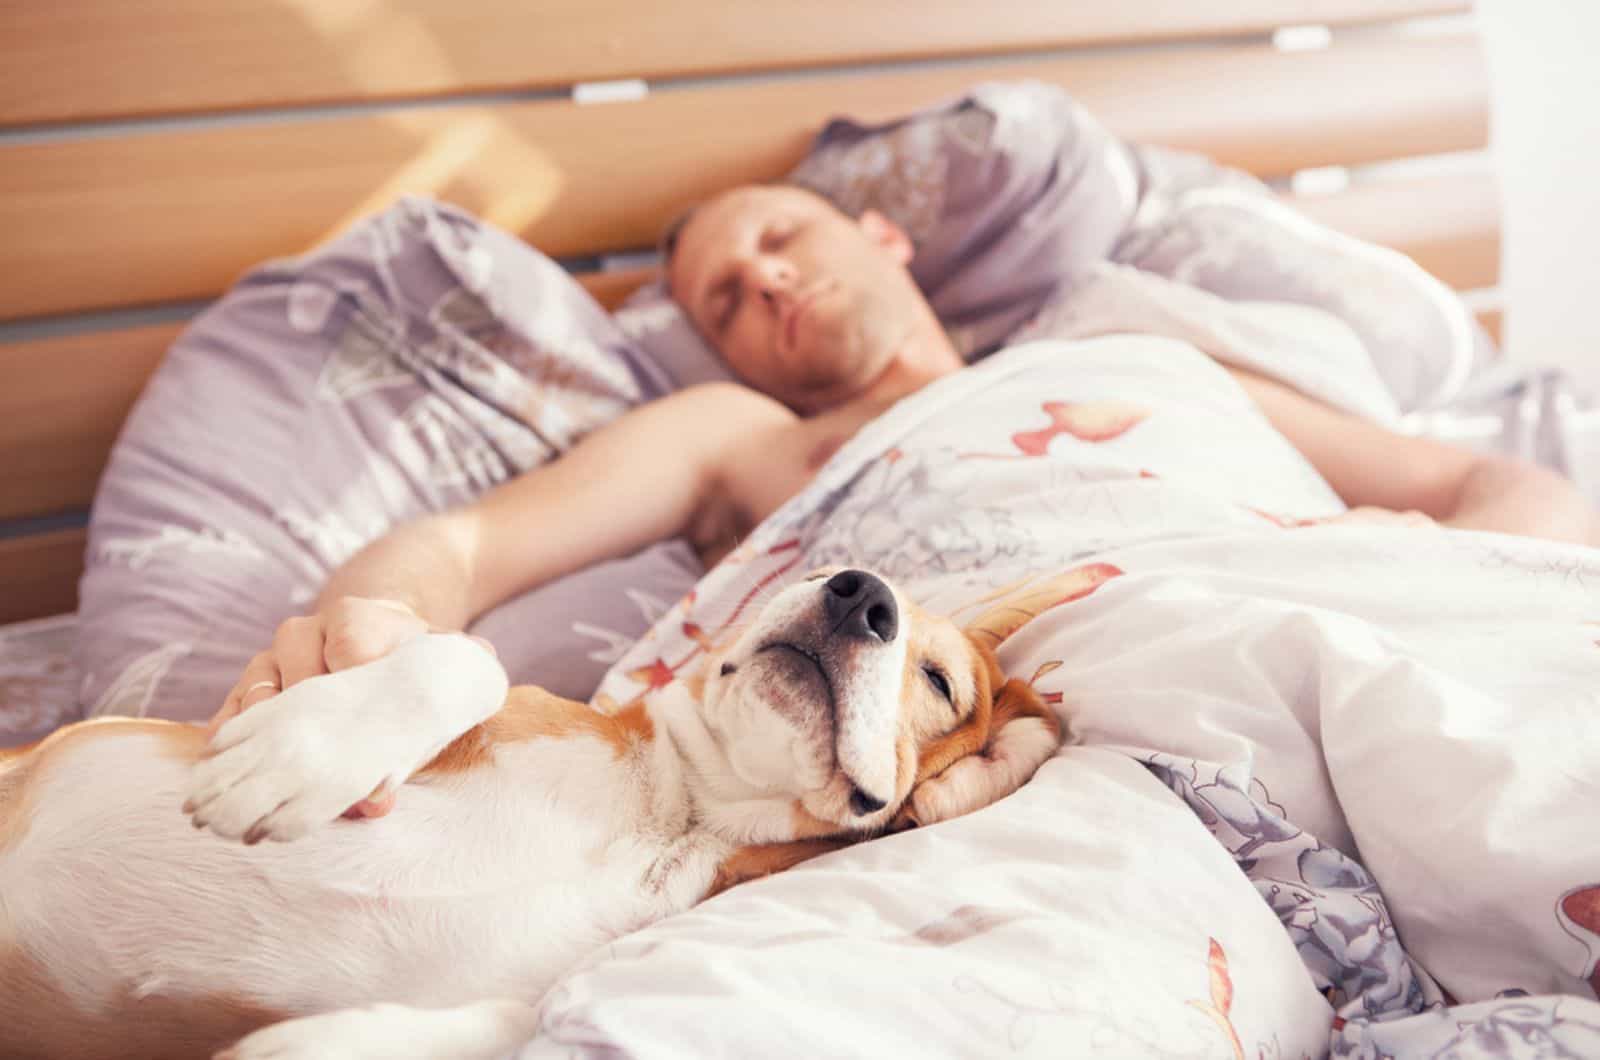 6 Reasons Why Sharing A Bed With Your Dog Might Not Be A Good Idea